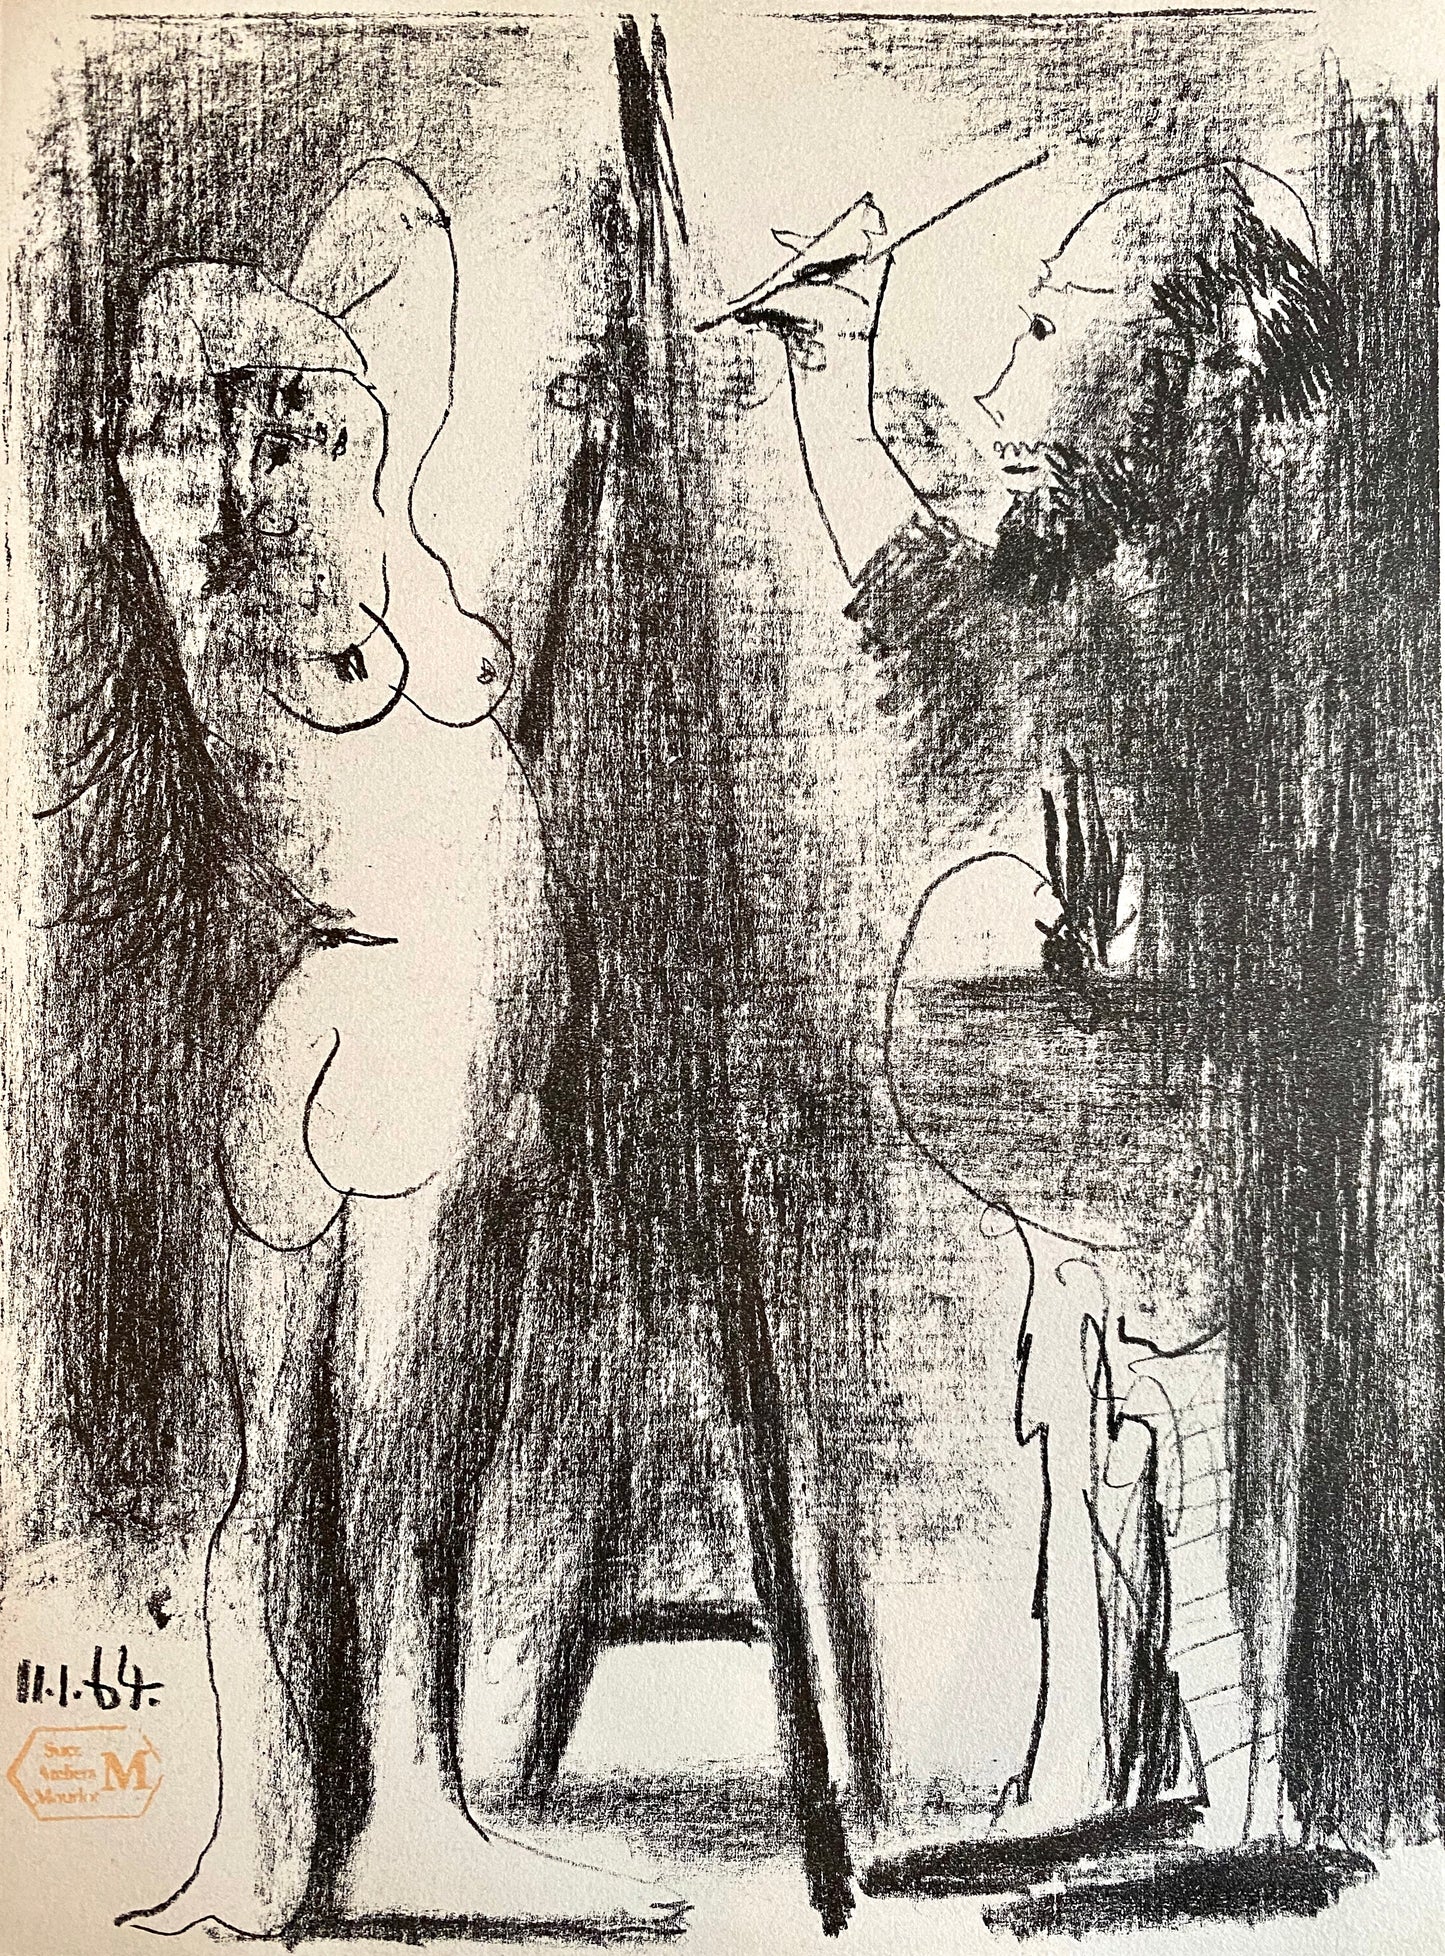 The Artist and his Model II by Pablo Picasso - Mourlot Editions - Fine_Art - Poster - Lithograph - Wall Art - Vintage - Prints - Original